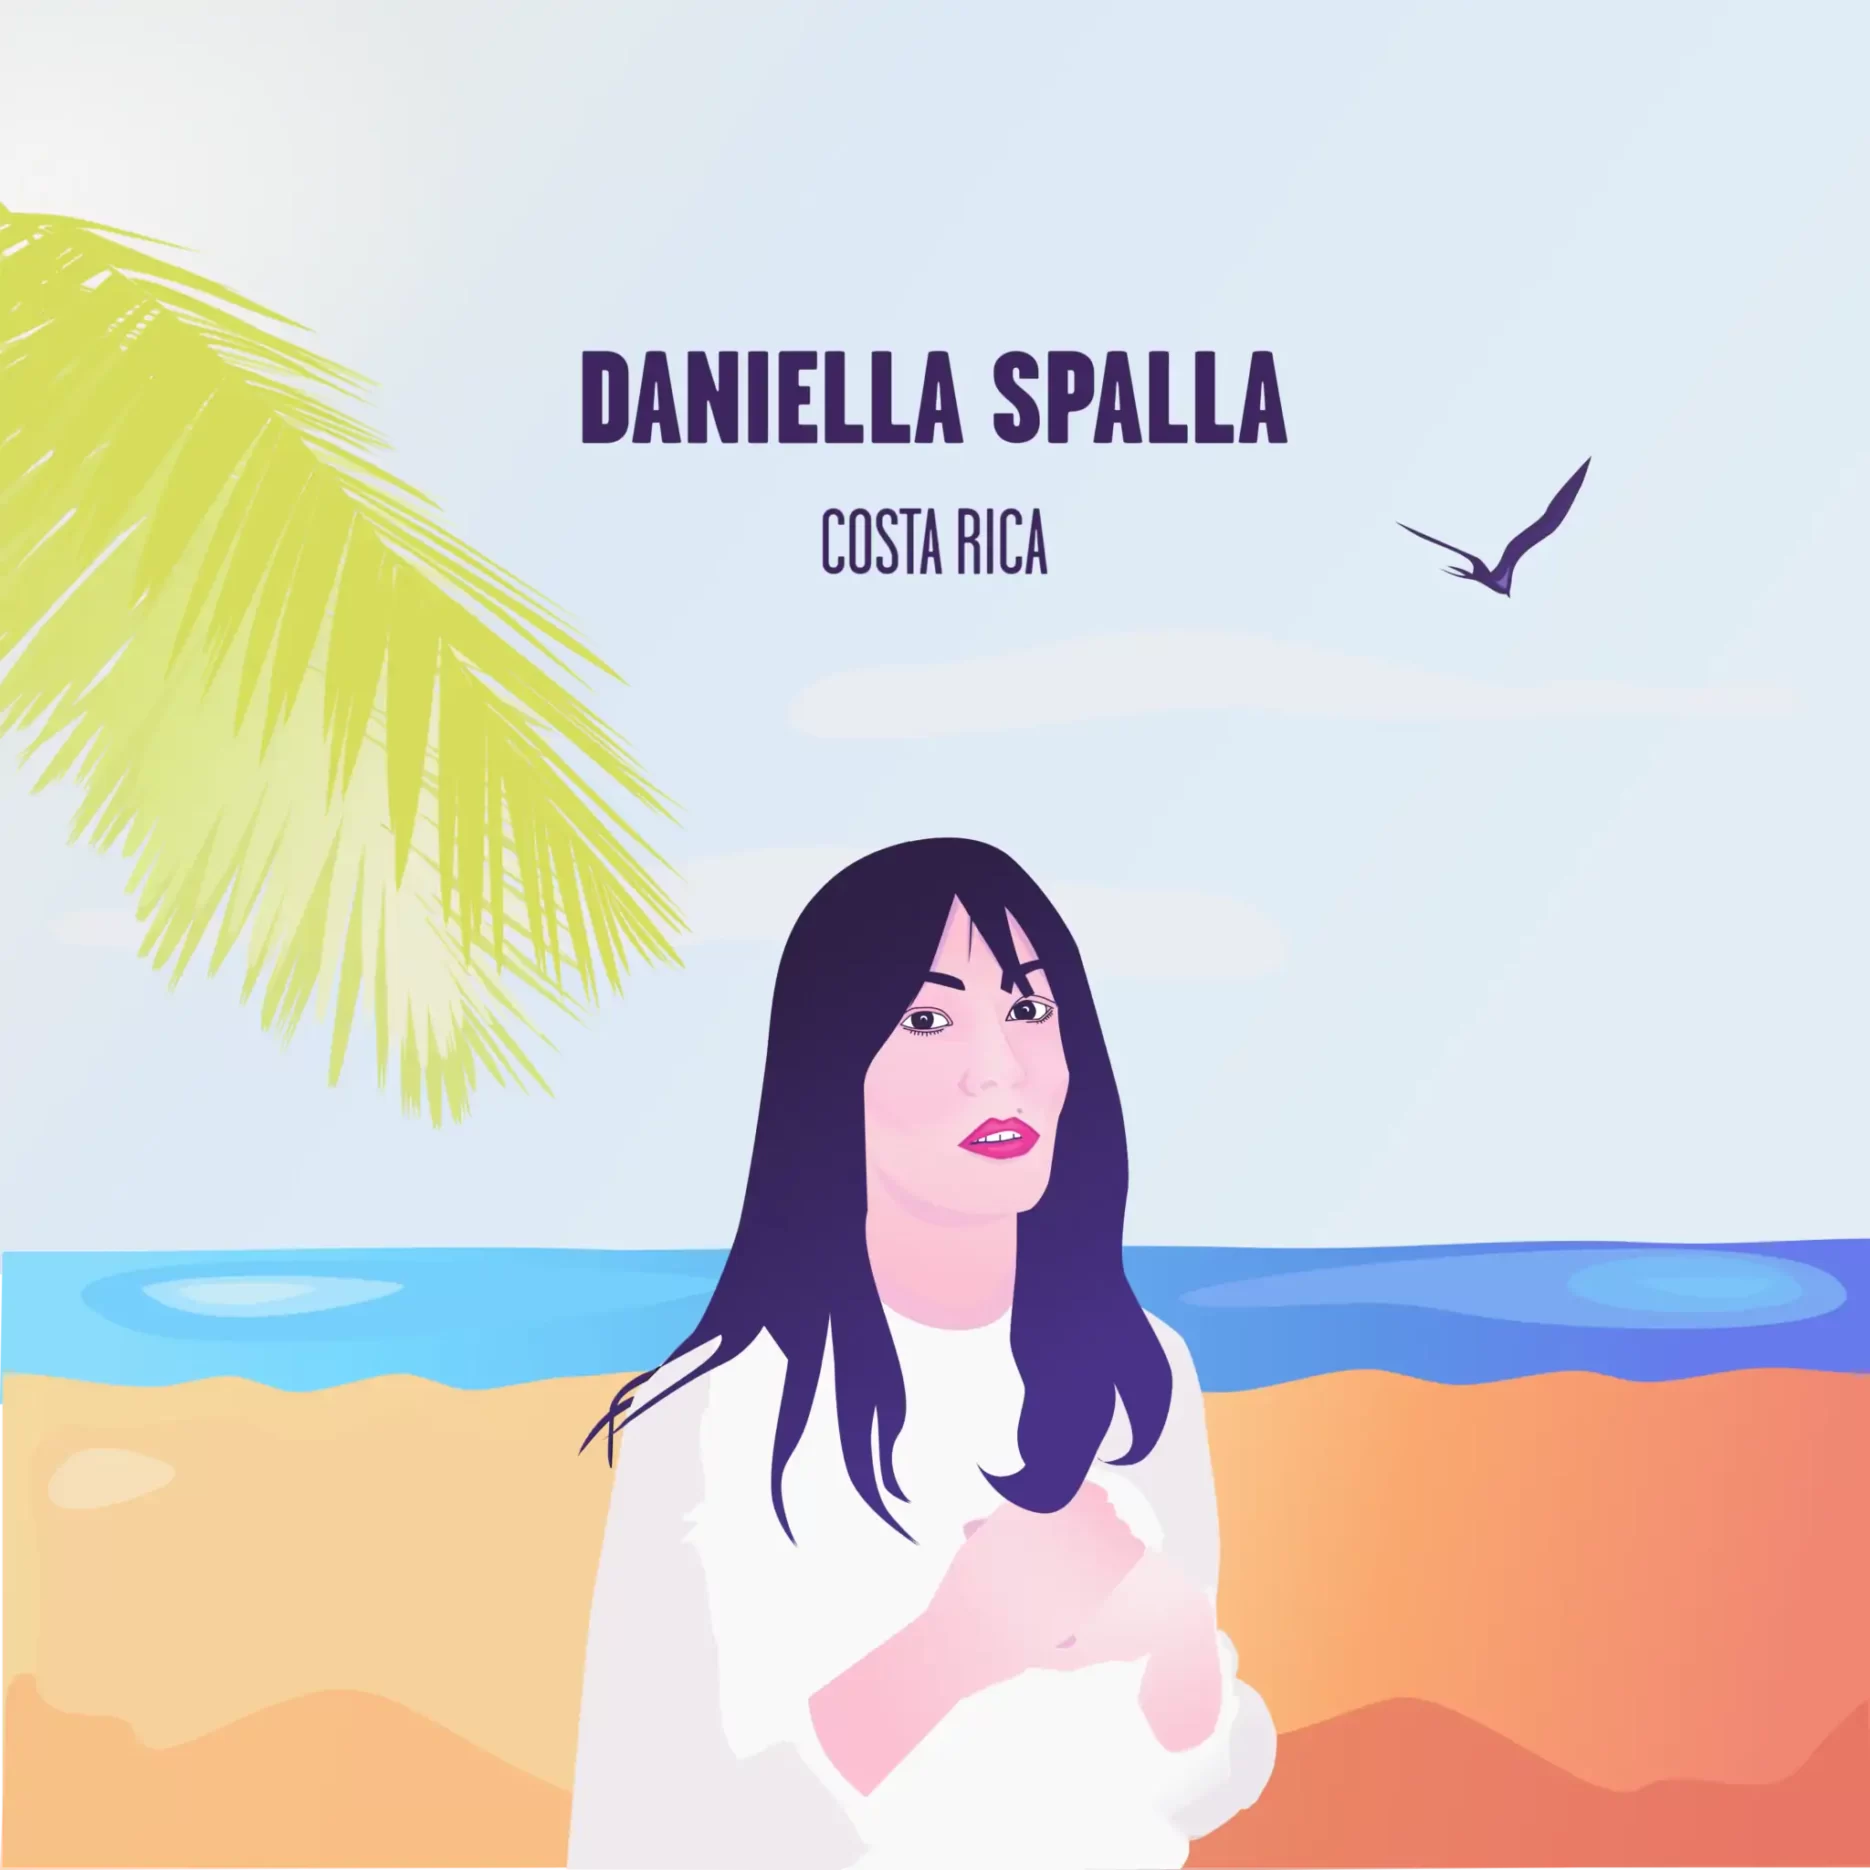 Daniela Spalla inspired album cover, here on front, a beach on the background